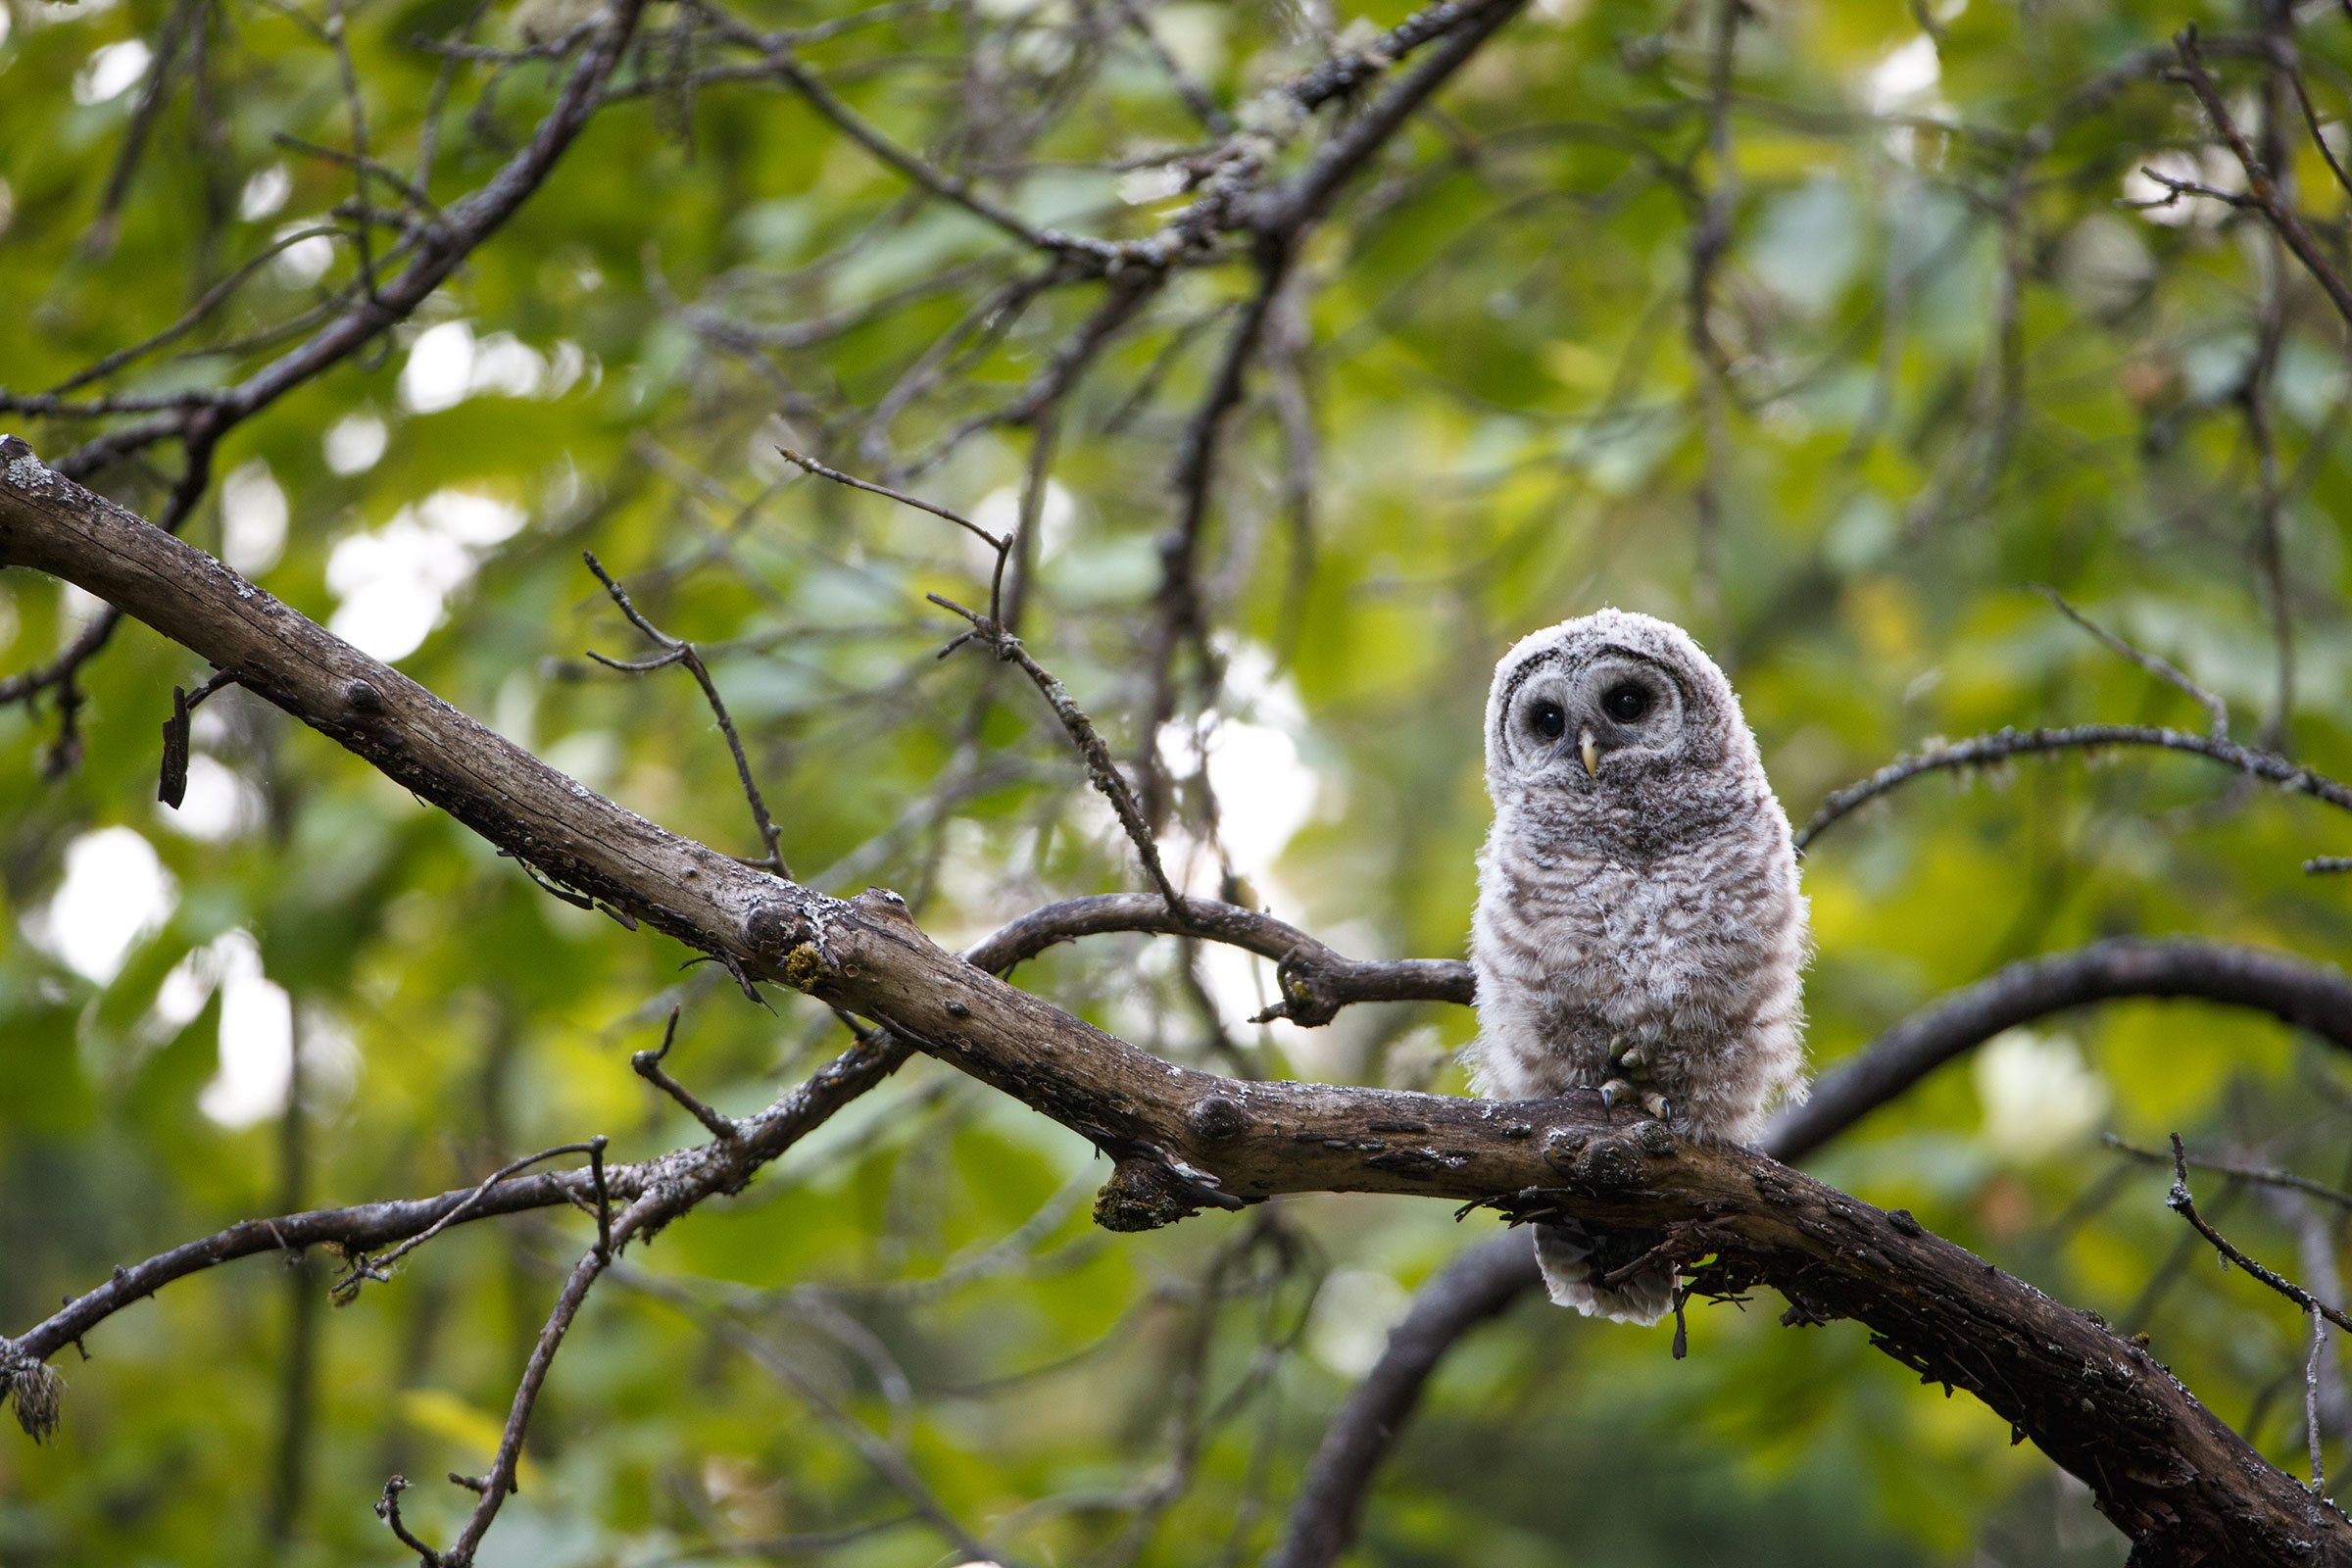 How Baby Owls Nap Without Falling From Their Trees | Audubon